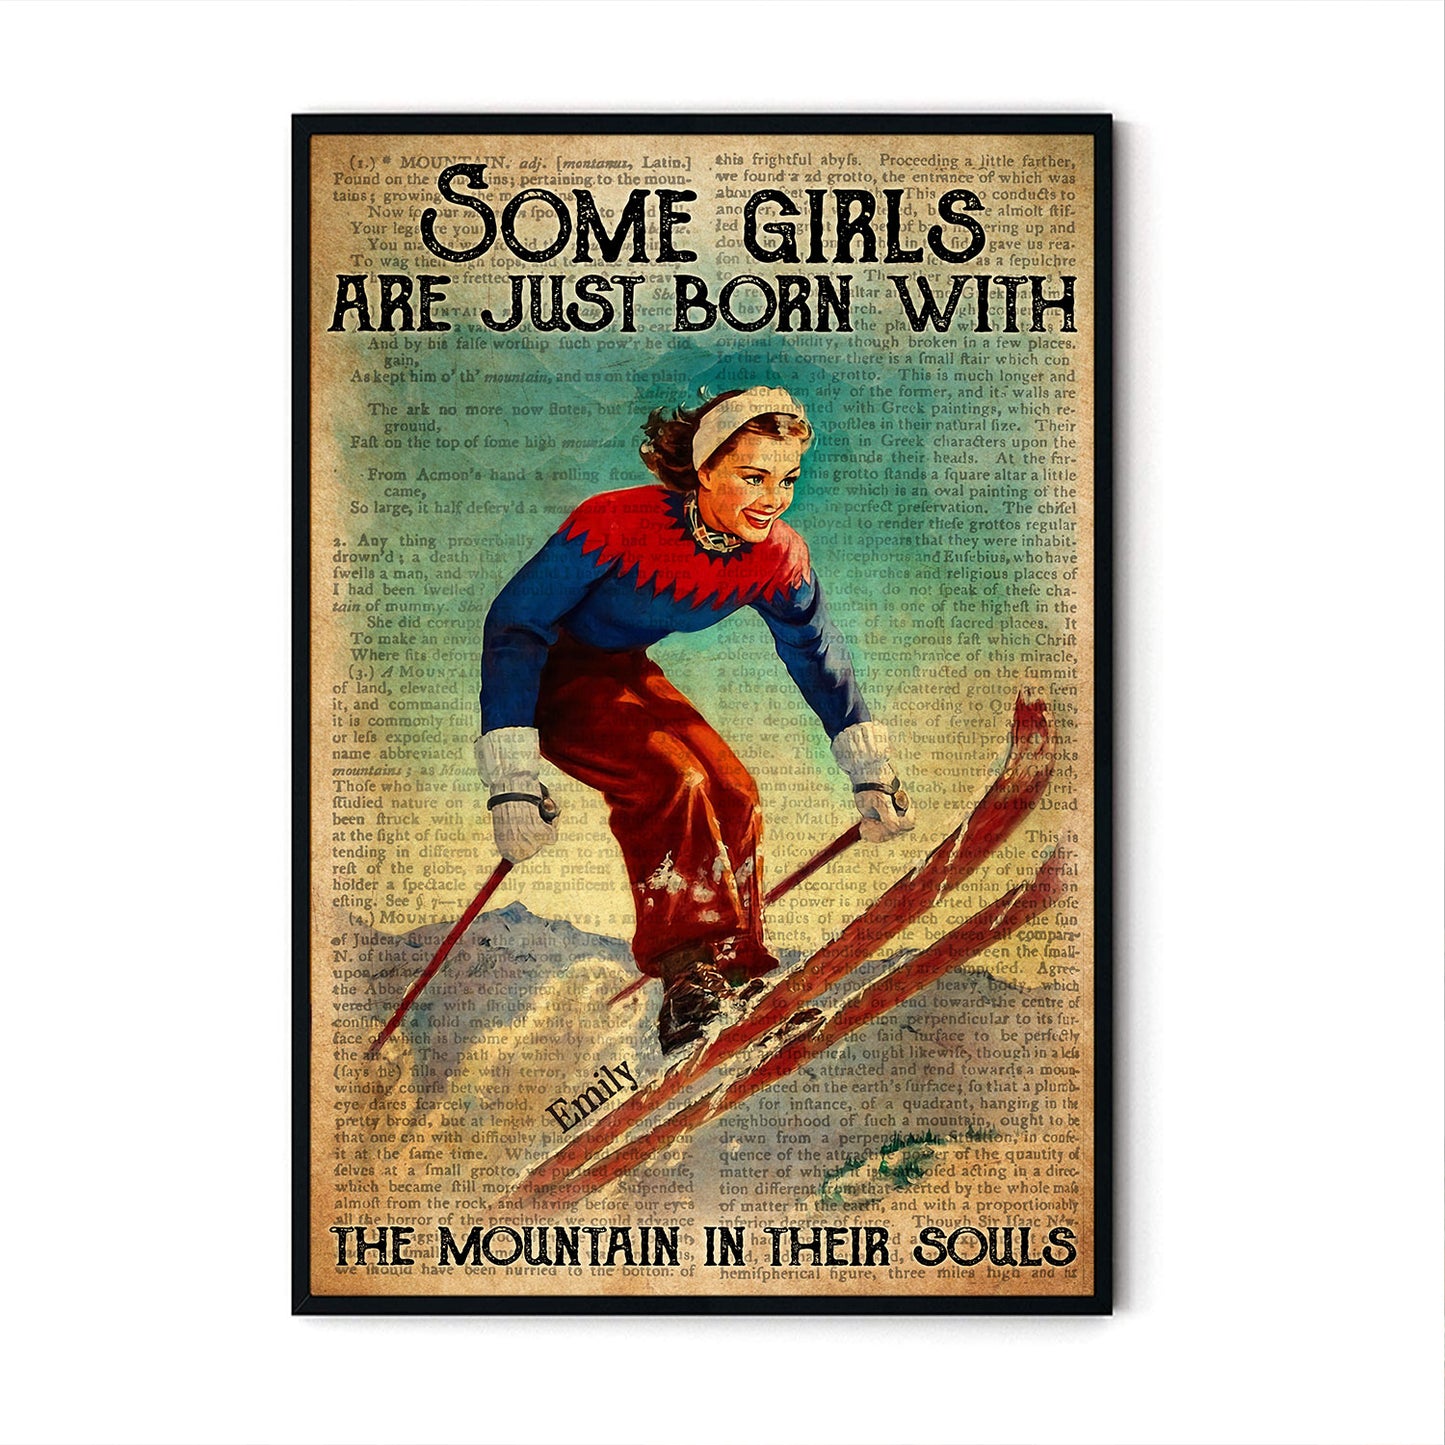 Skiing Some Girls Are Just Born With The Mountain In Their Souls Poster